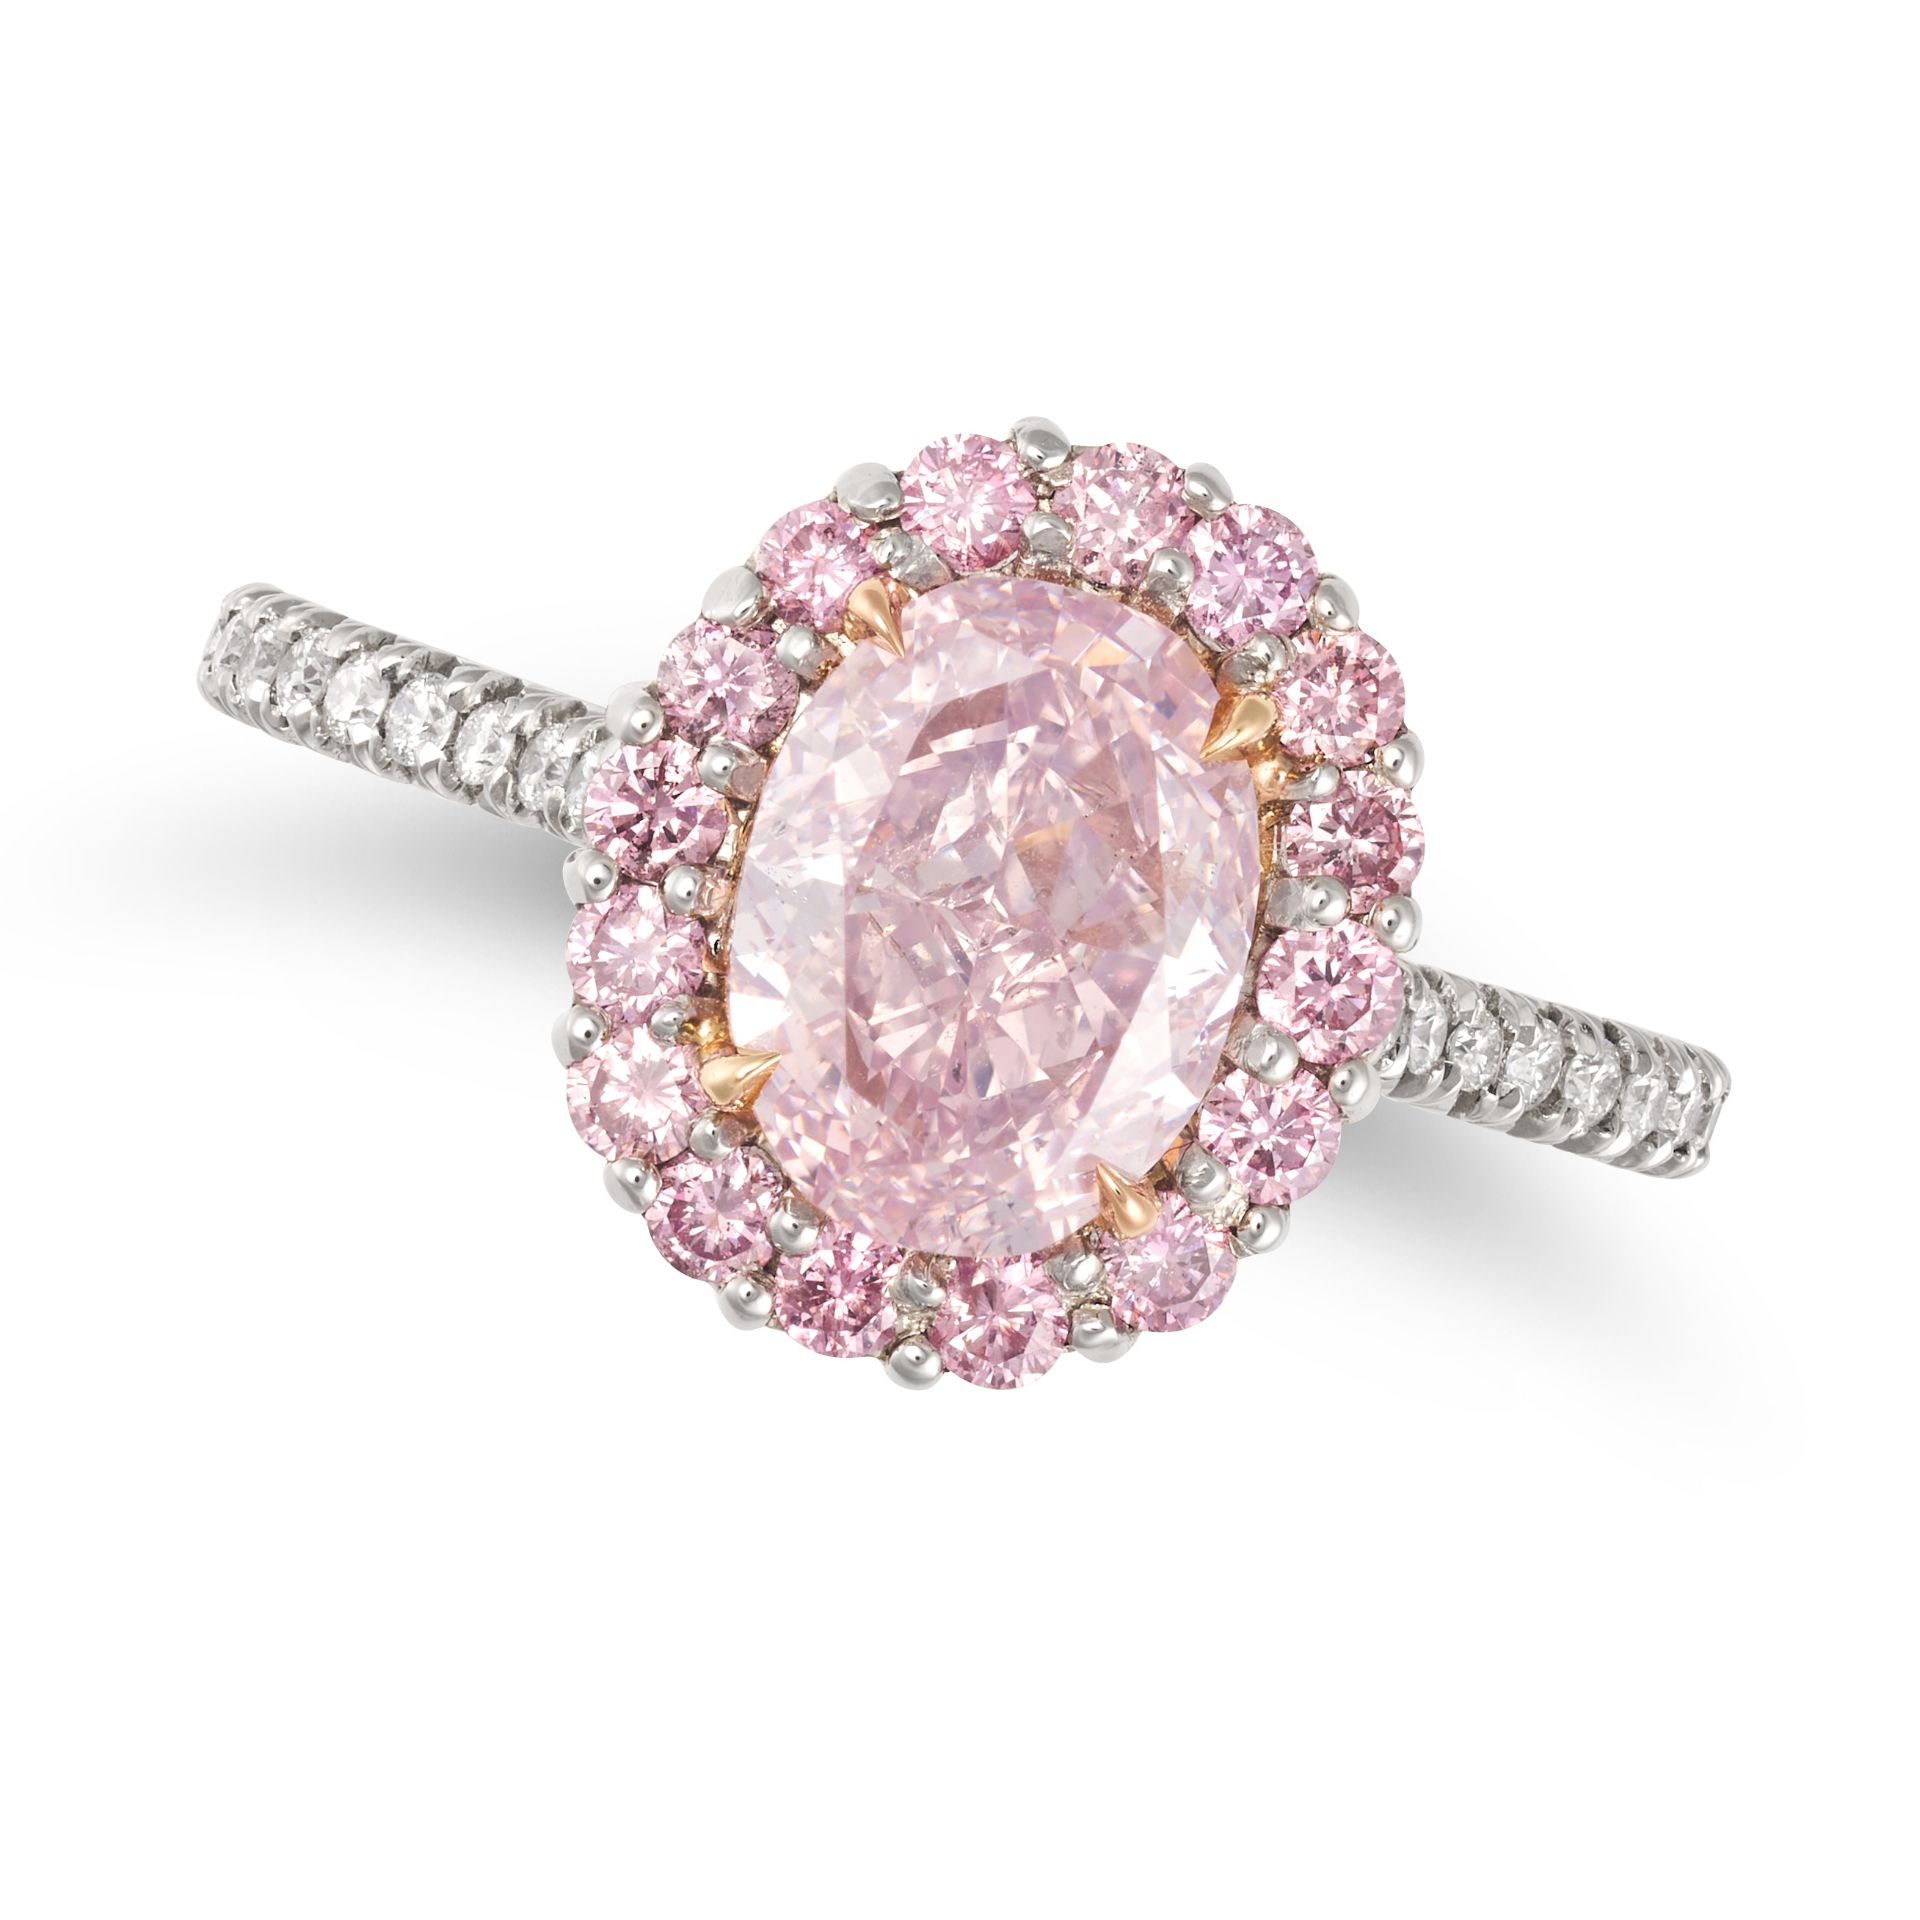 AN IMPORTANT FANCY PURPLISH PINK DIAMOND RING in platinum and 18ct white gold, set with an oval c...